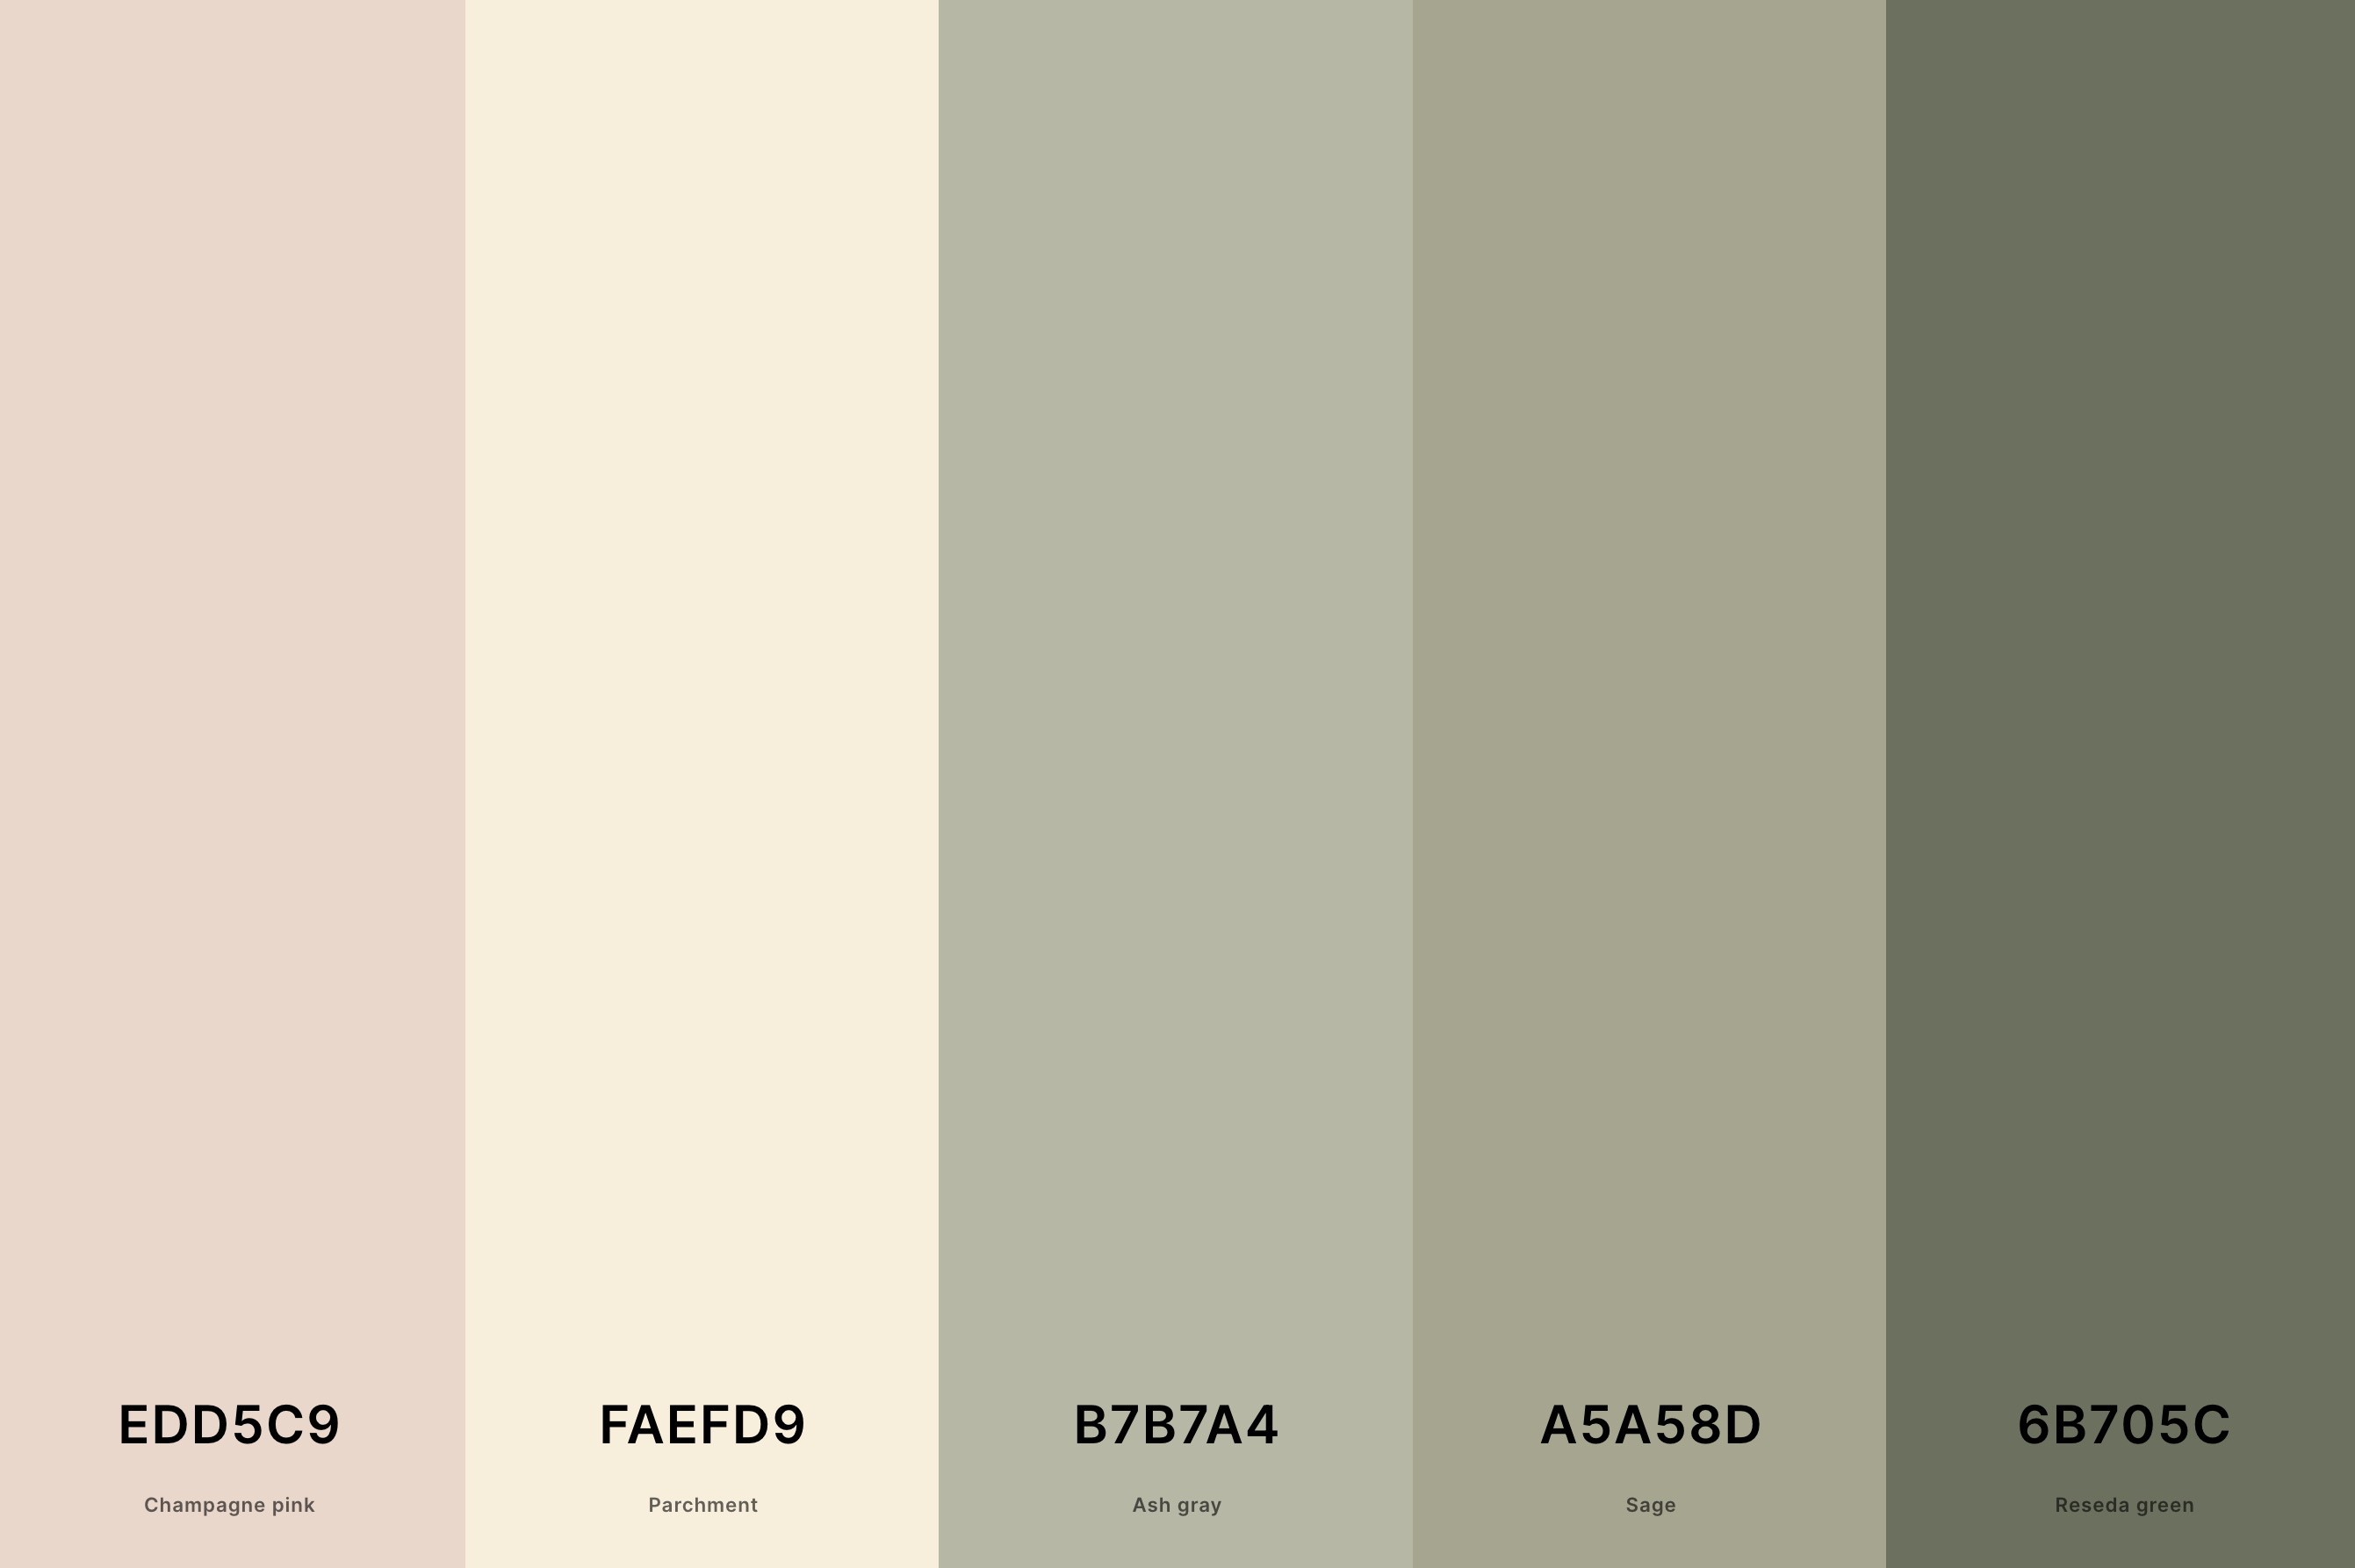 19. Beige And Sage Color Palette Color Palette with Champagne Pink (Hex #EDD5C9) + Parchment (Hex #FAEFD9) + Ash Gray (Hex #B7B7A4) + Sage (Hex #A5A58D) + Reseda Green (Hex #6B705C) Color Palette with Hex Codes